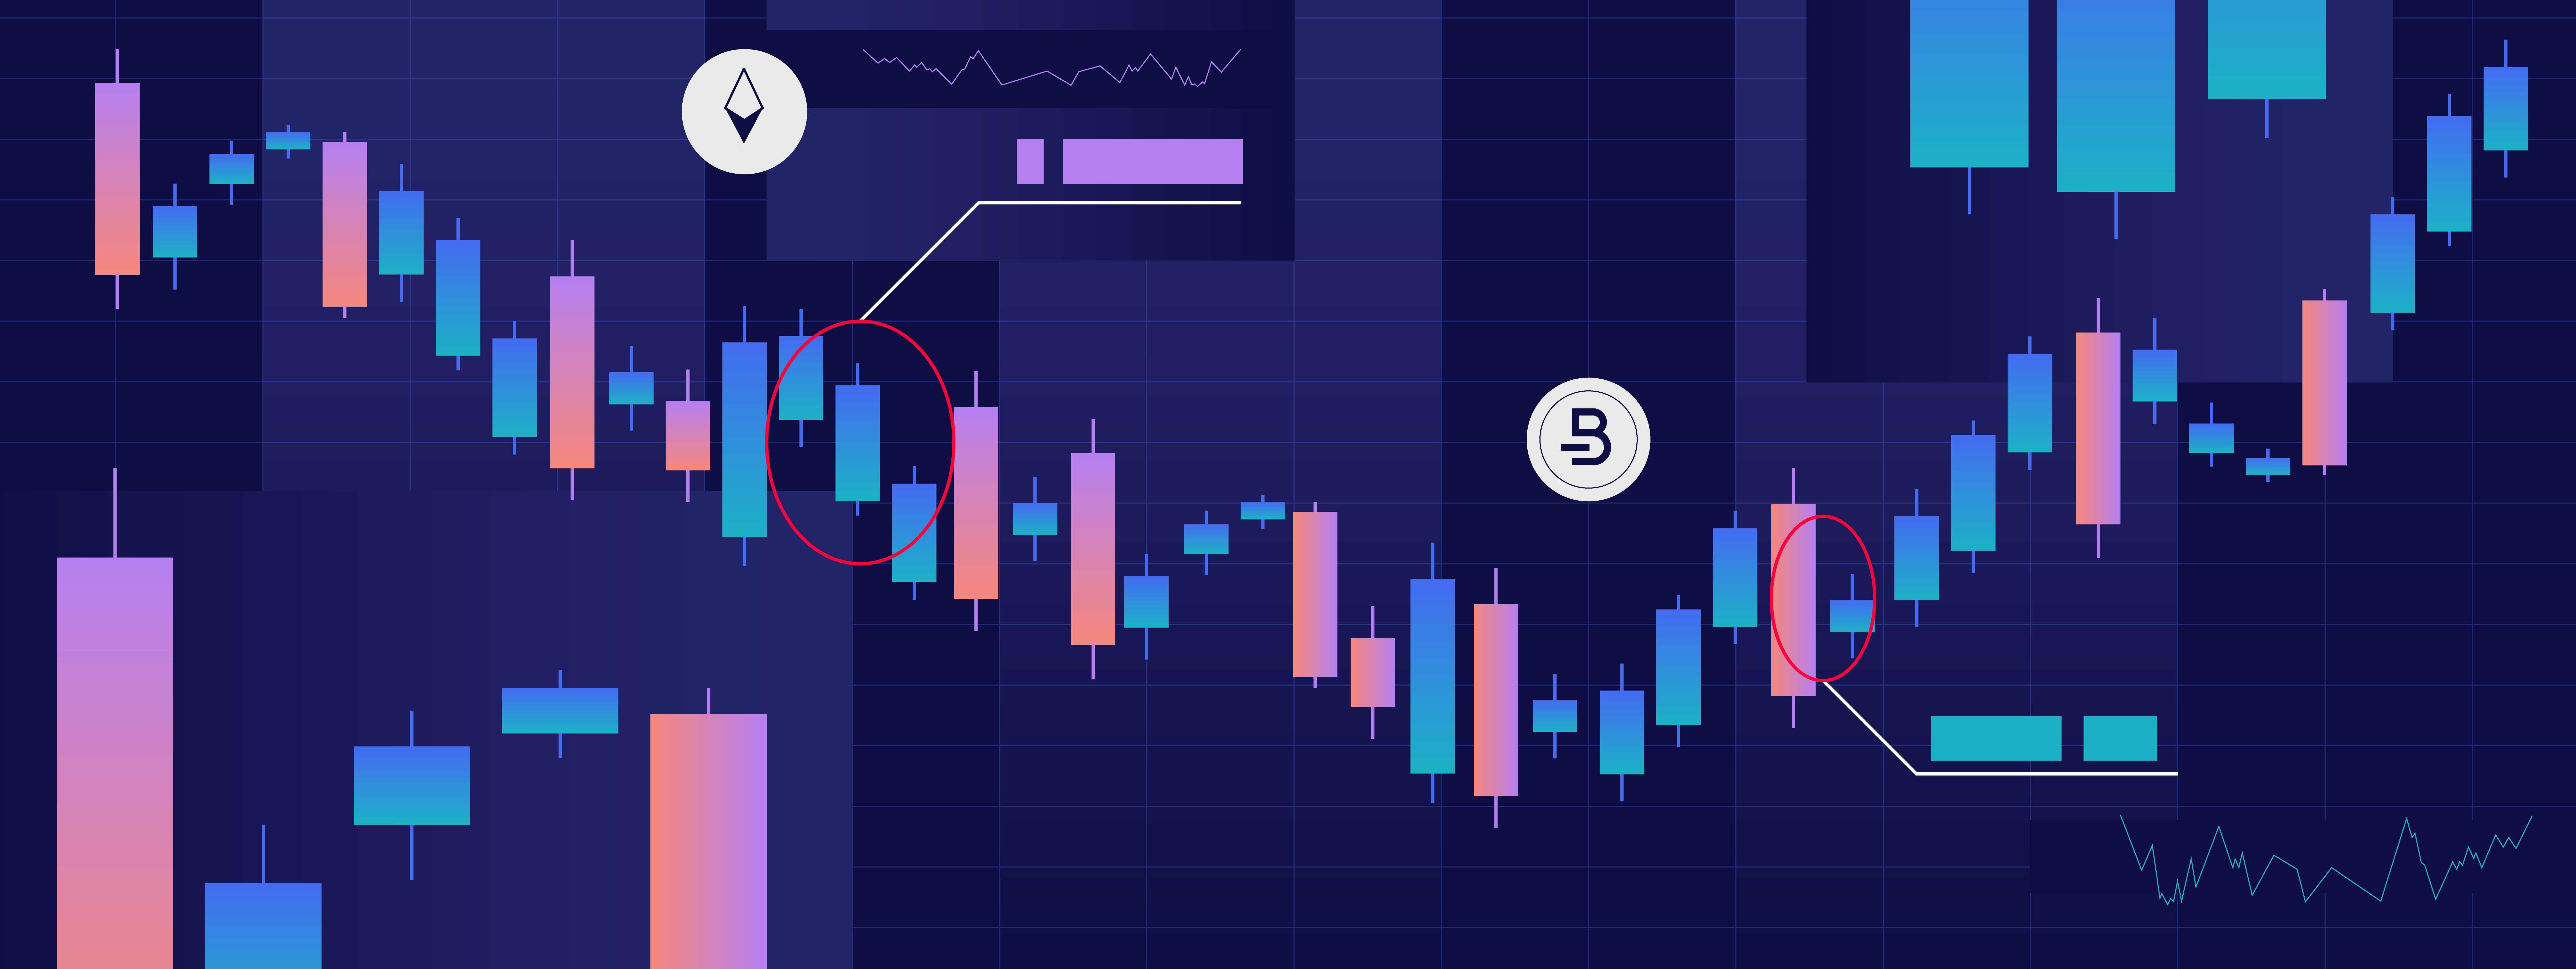 How to read candlesticks in technical analysis